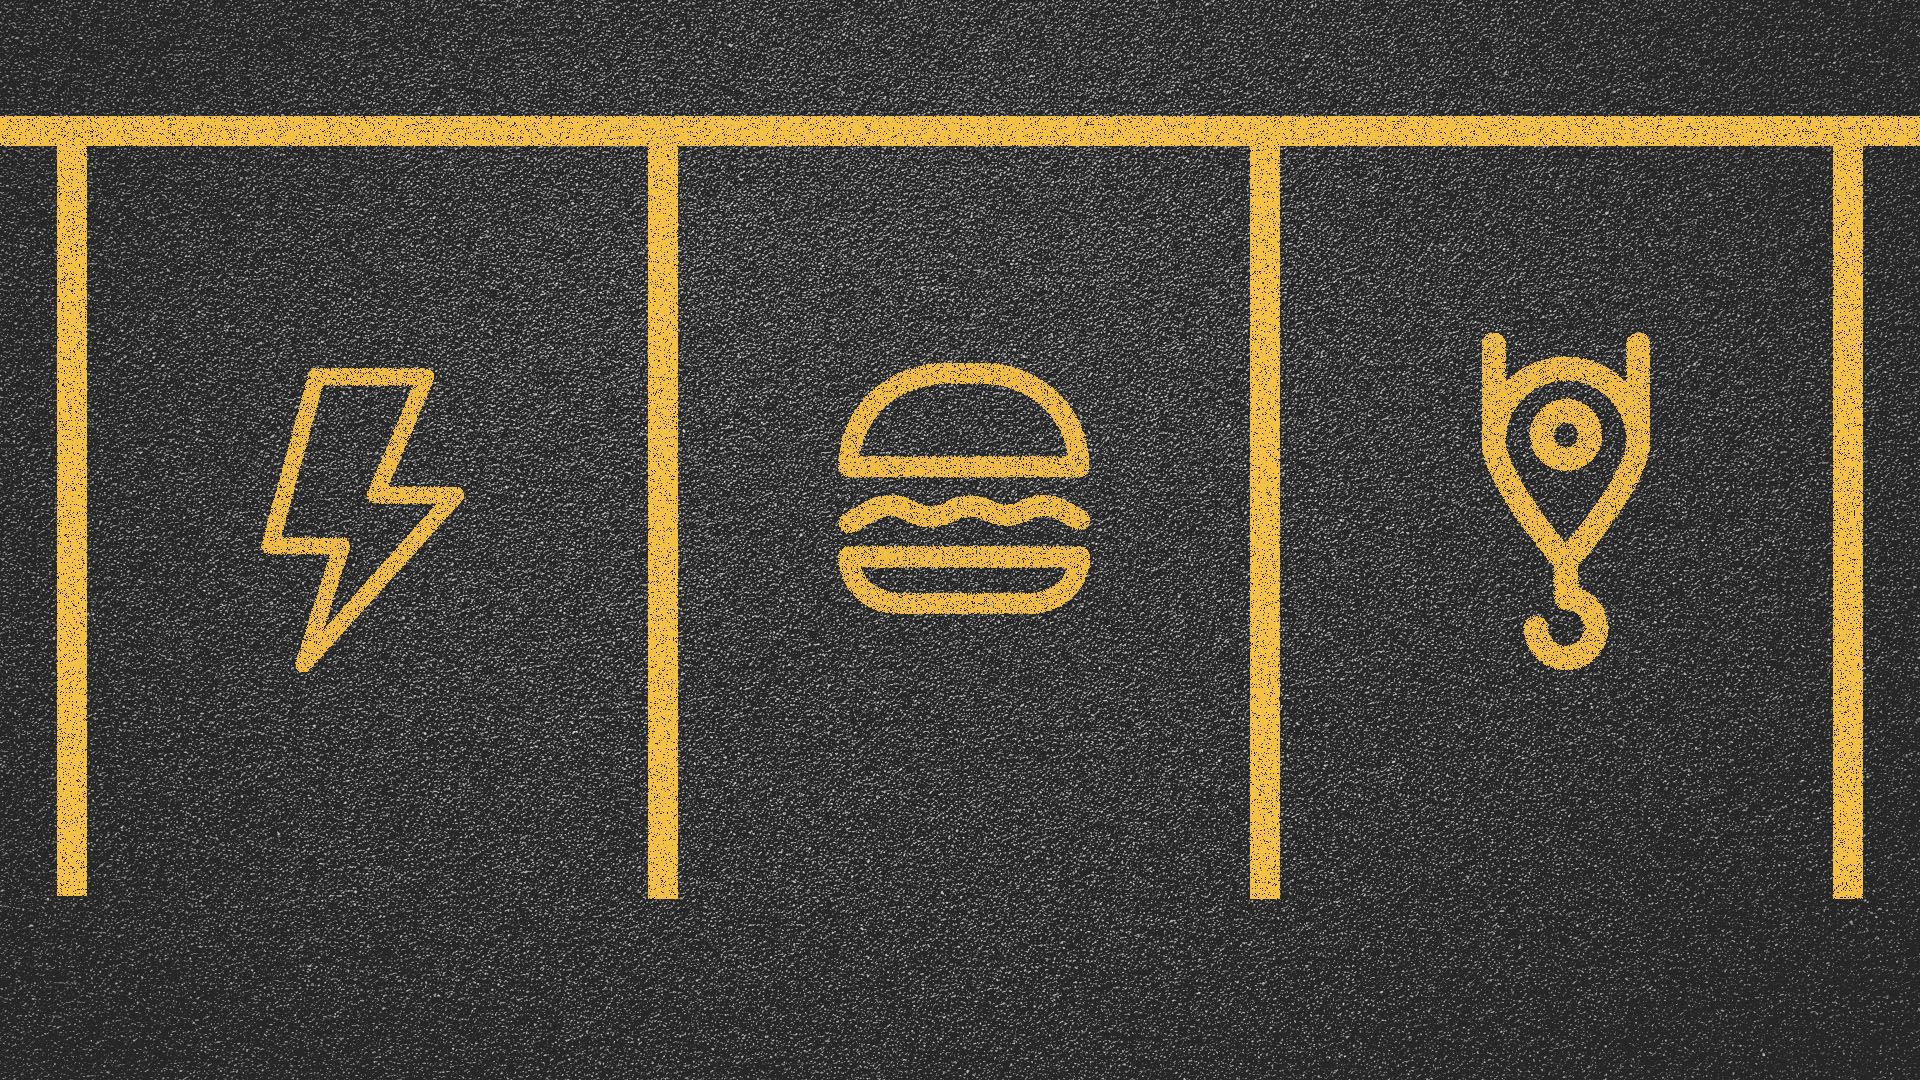 Illustration of parking spaces with food, electricity, and building symbols on the ground